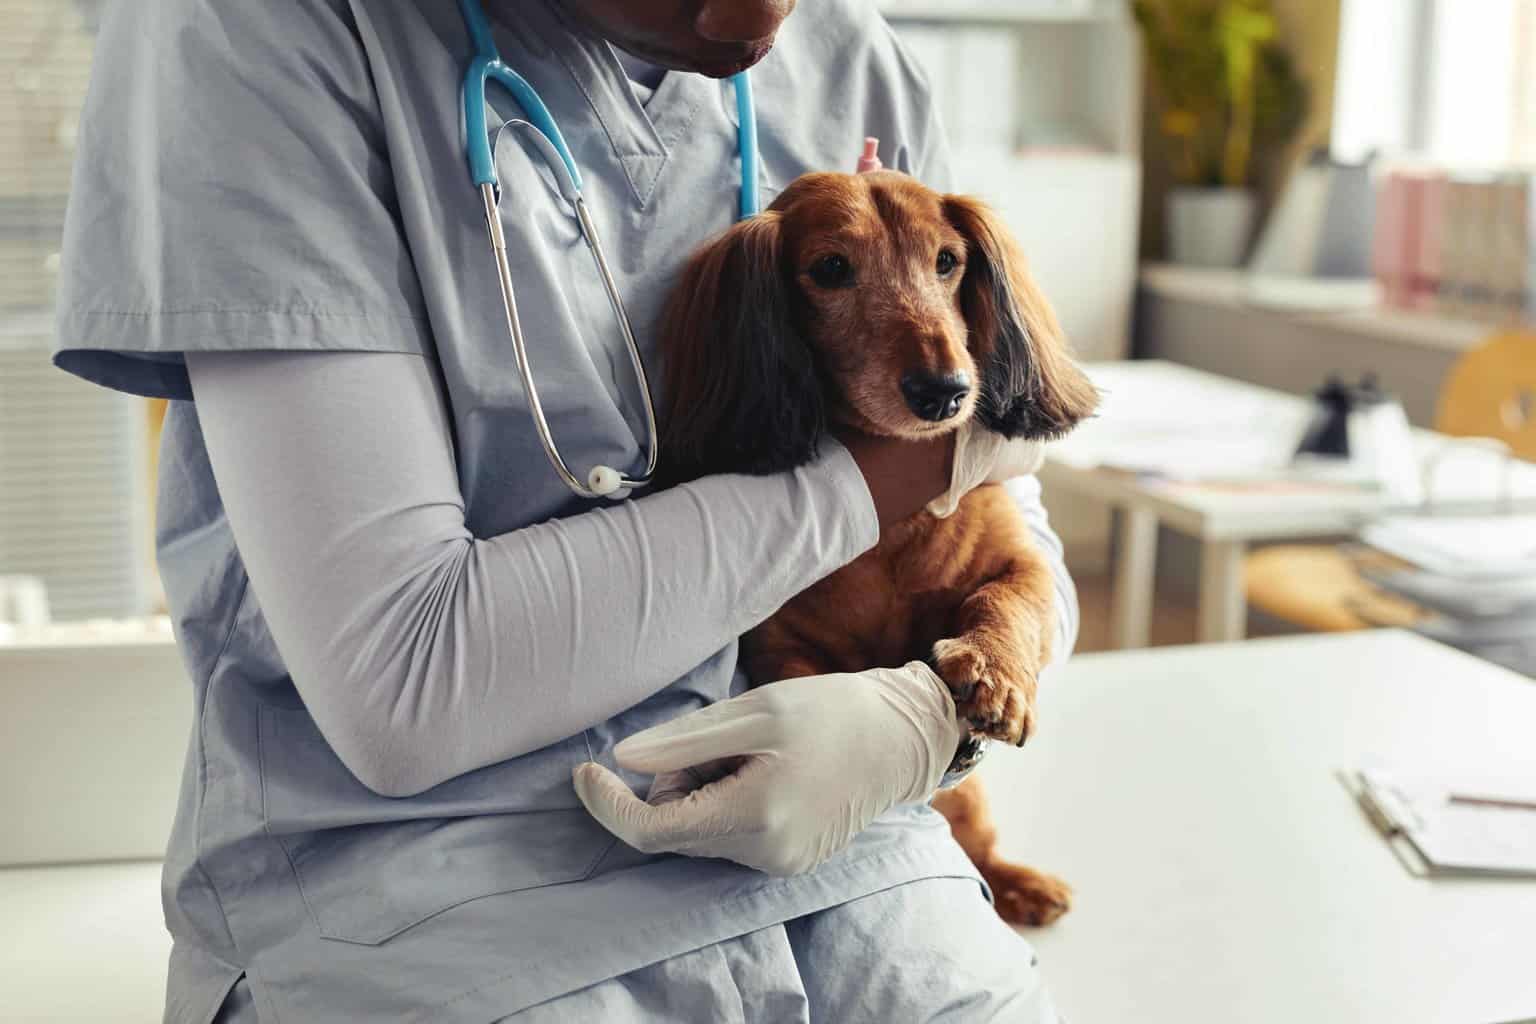 Vet comforts sick dachshund. Before you buy insurance for your dog, understand the reimbursement process. Some companies require you to pay the veterinary bill upfront and submit a claim form and receipts.